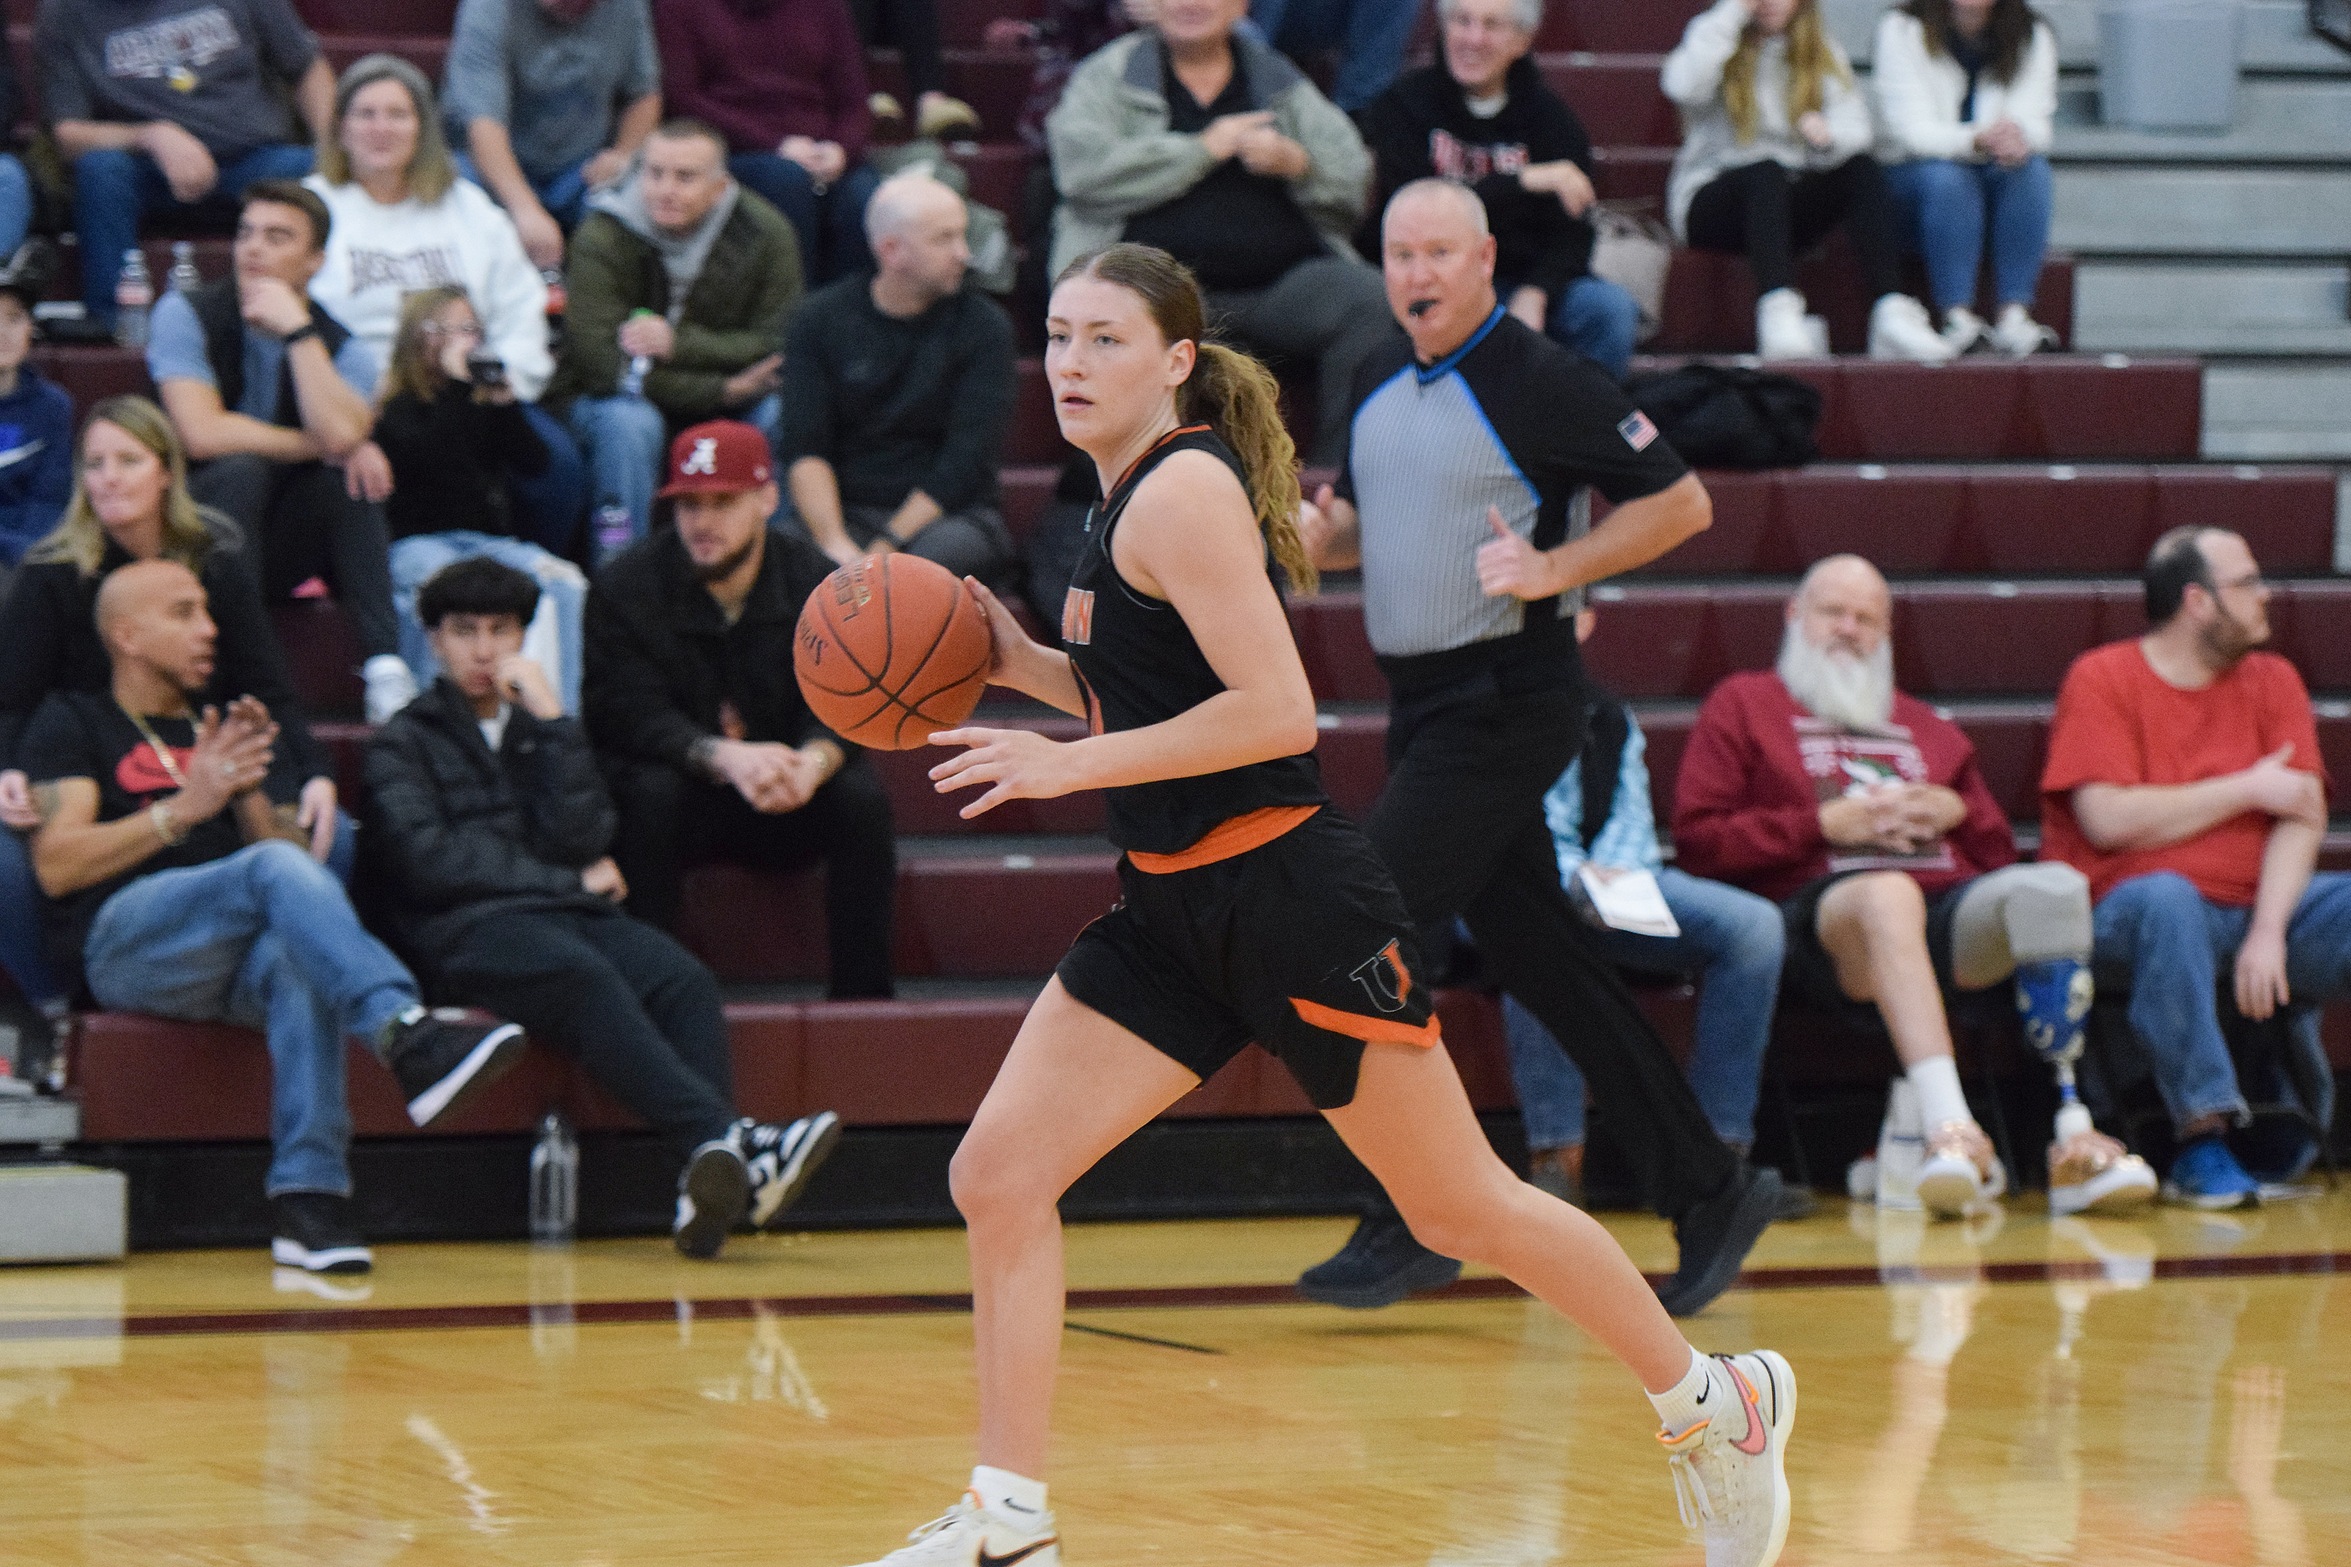 Jimmie women take second win over VCSU